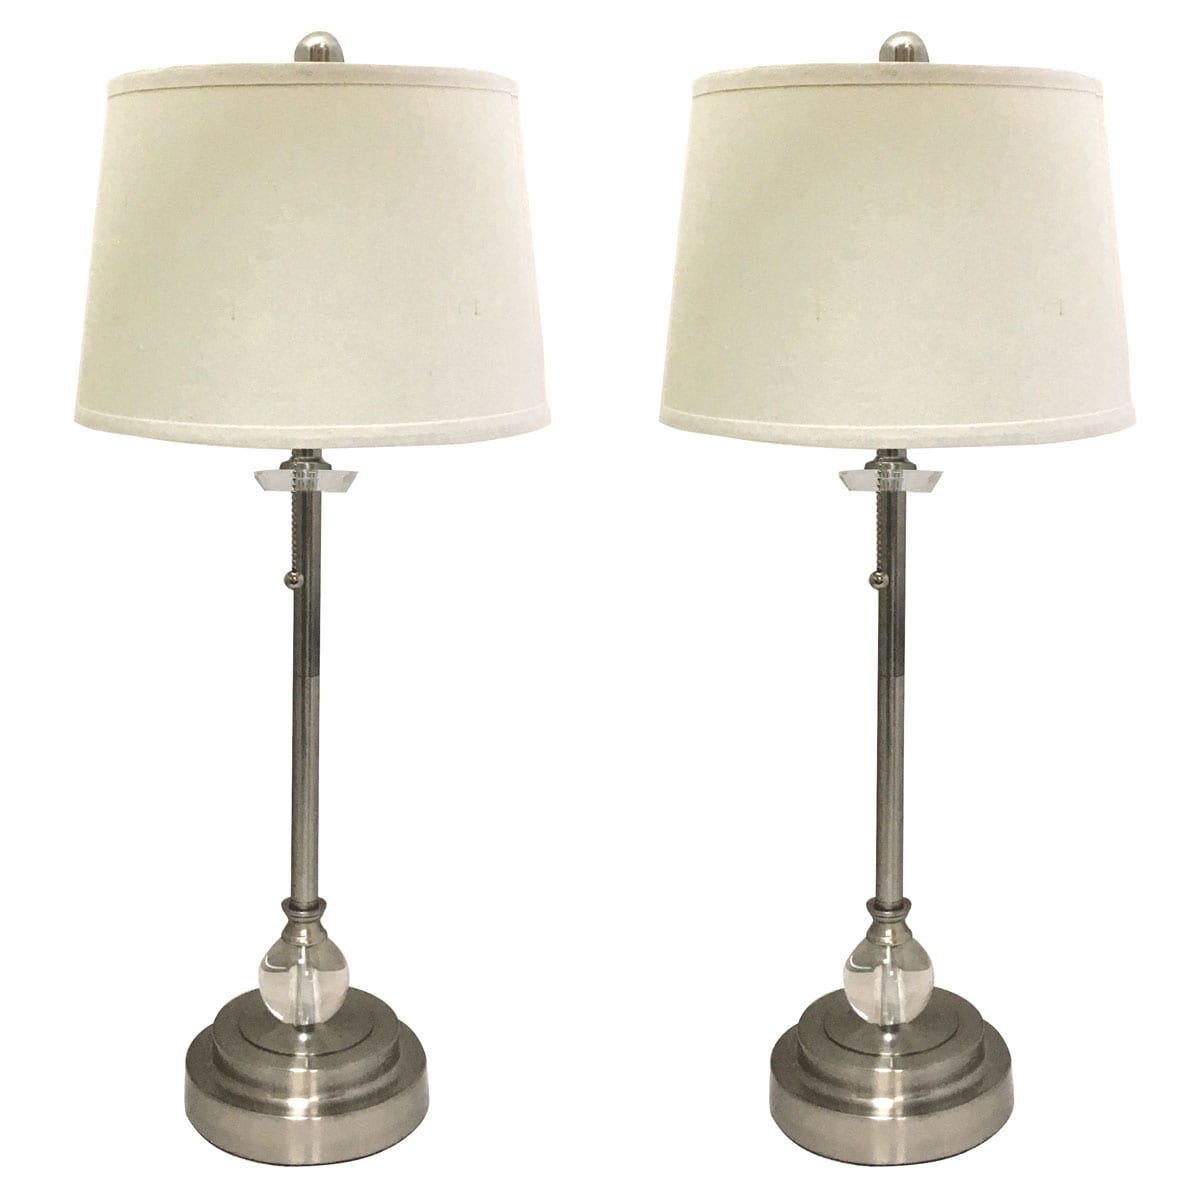 Set Of 2 Brushed Nickel Buffet Lamps, Linen Lamp Shades Table Lamps